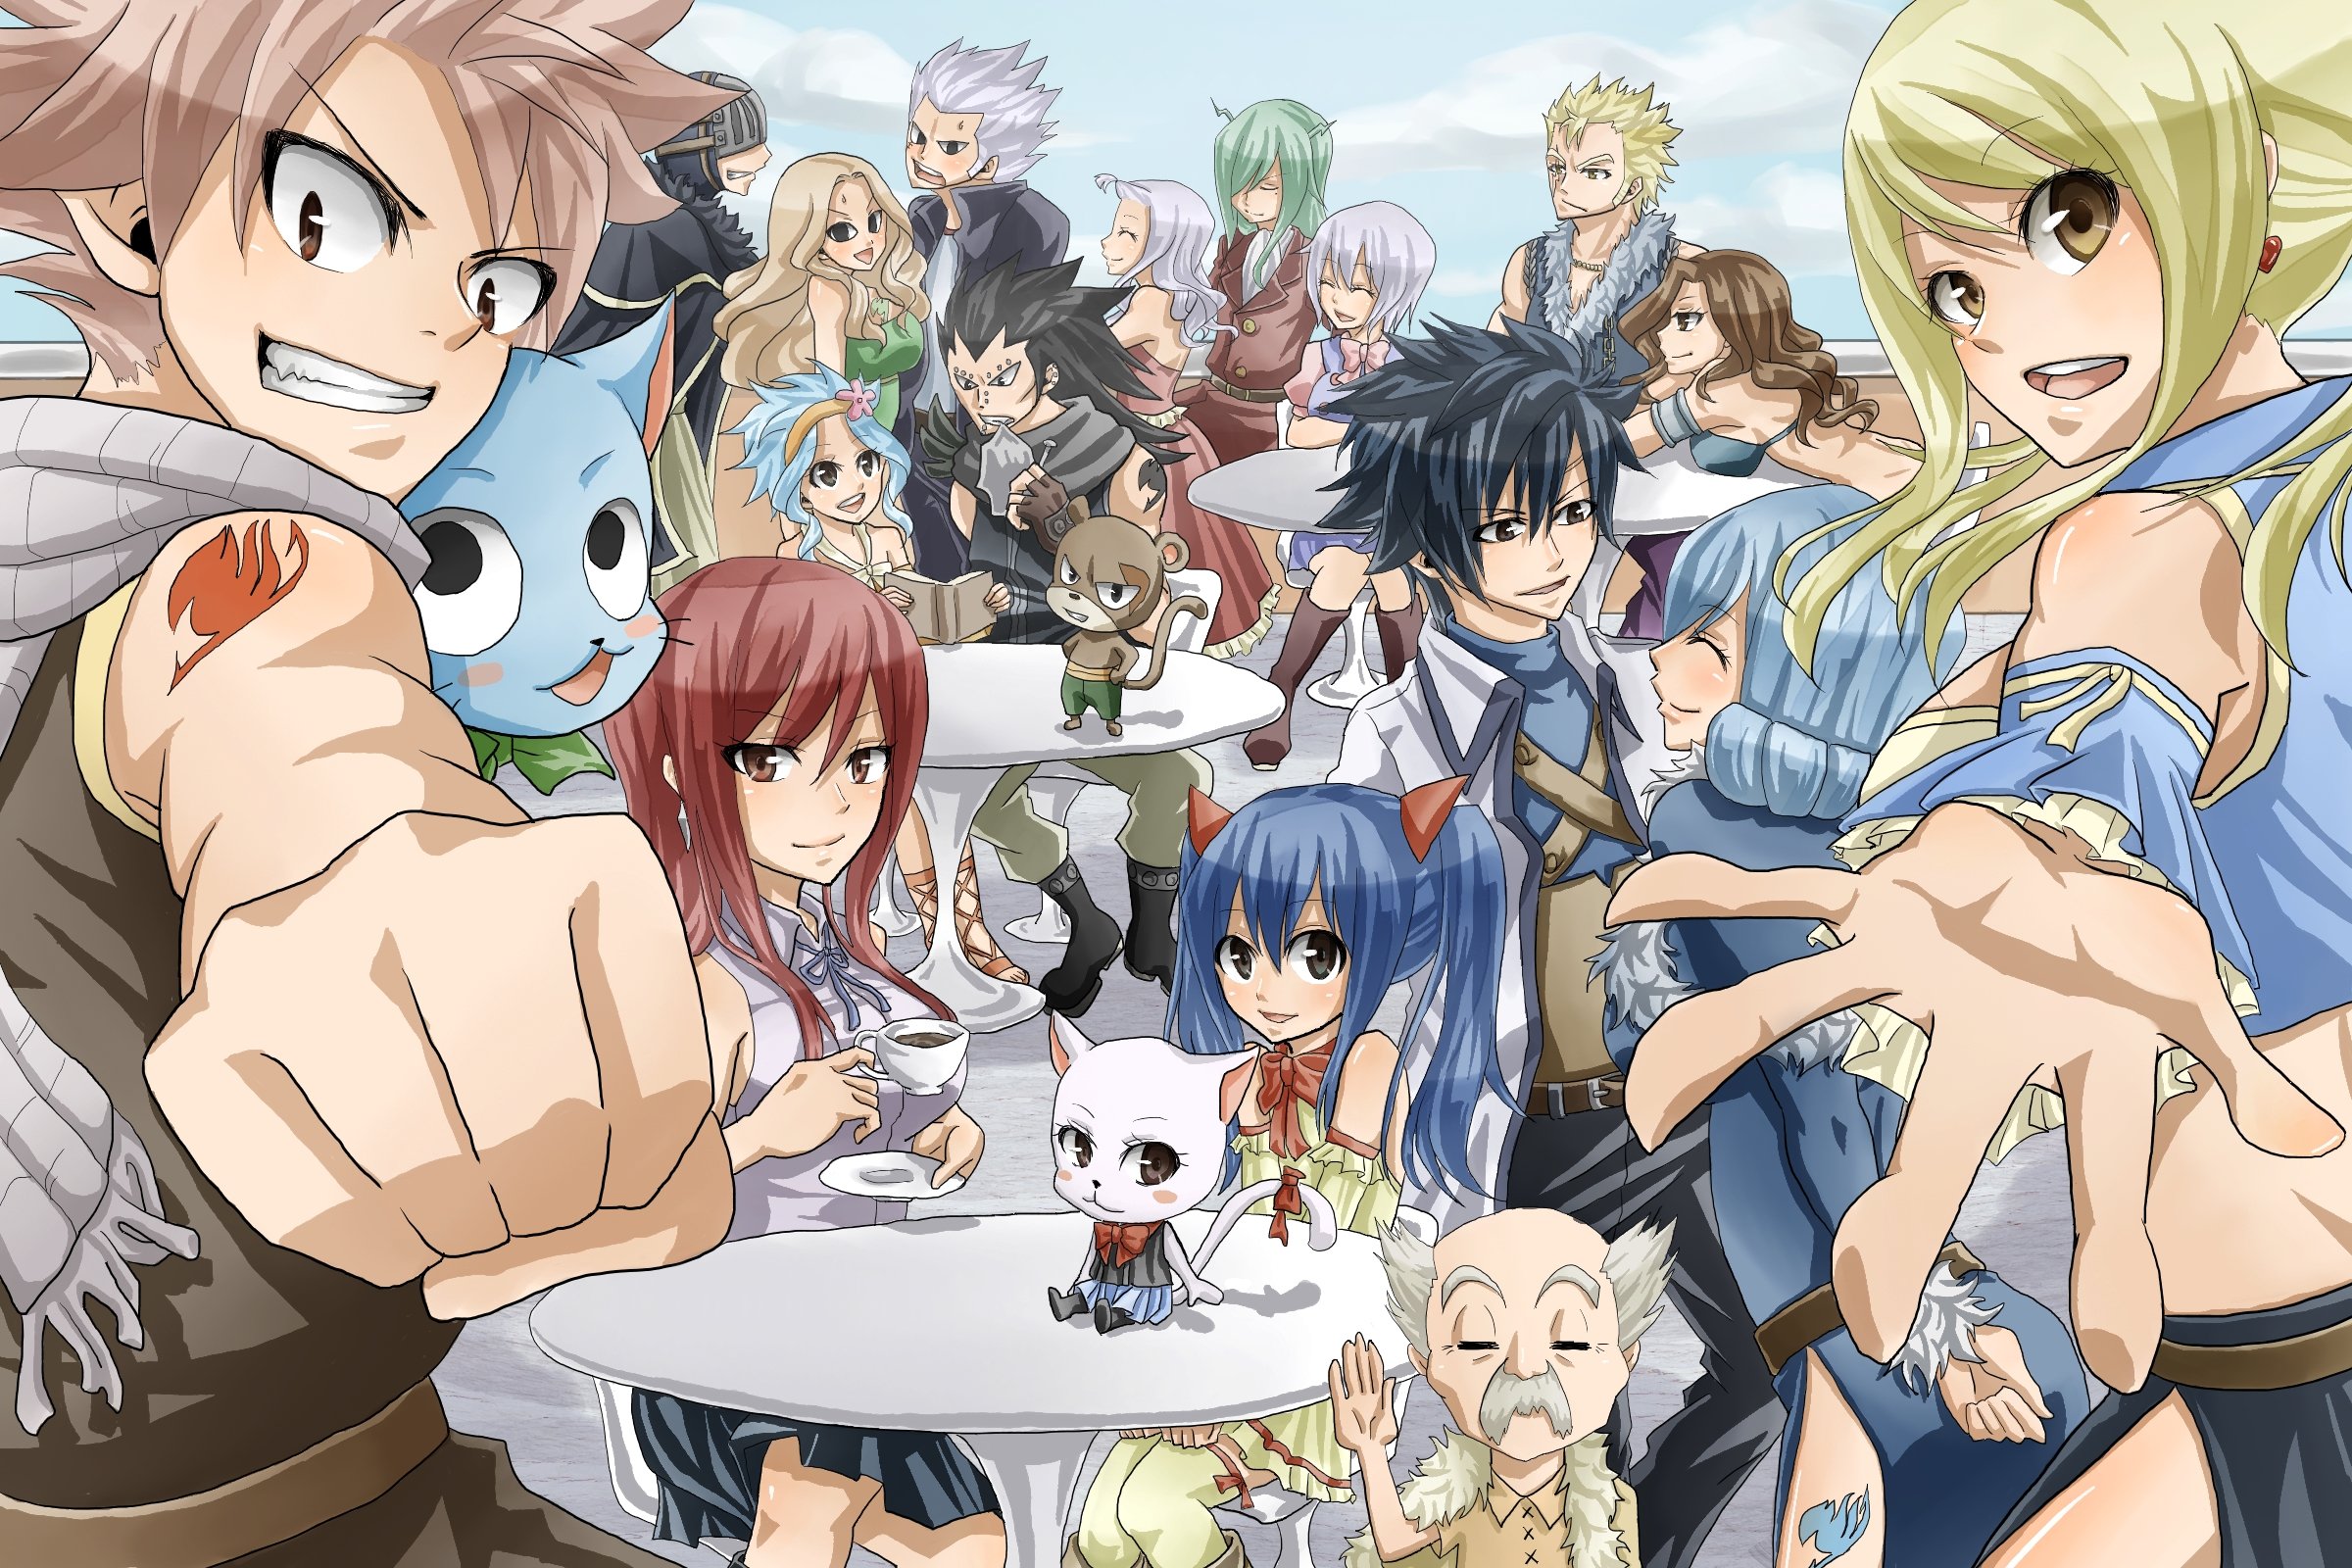 Download Fairy Tail Wallpaper Desktop Backgrounds for